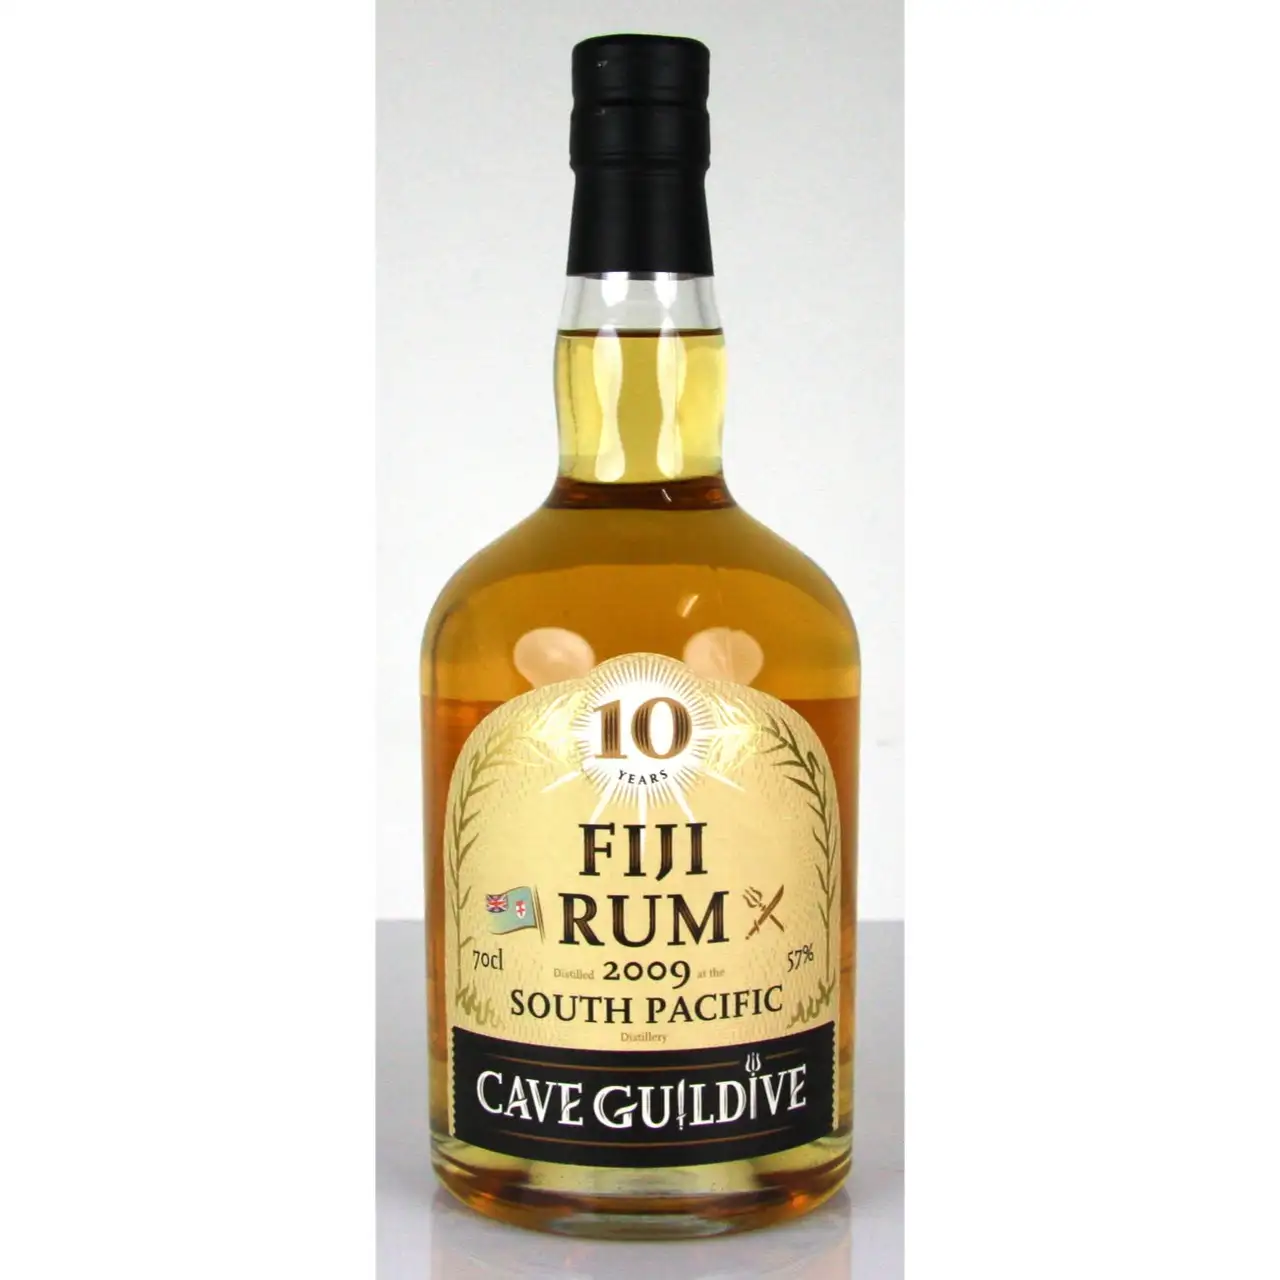 Image of the front of the bottle of the rum Fiji Rum